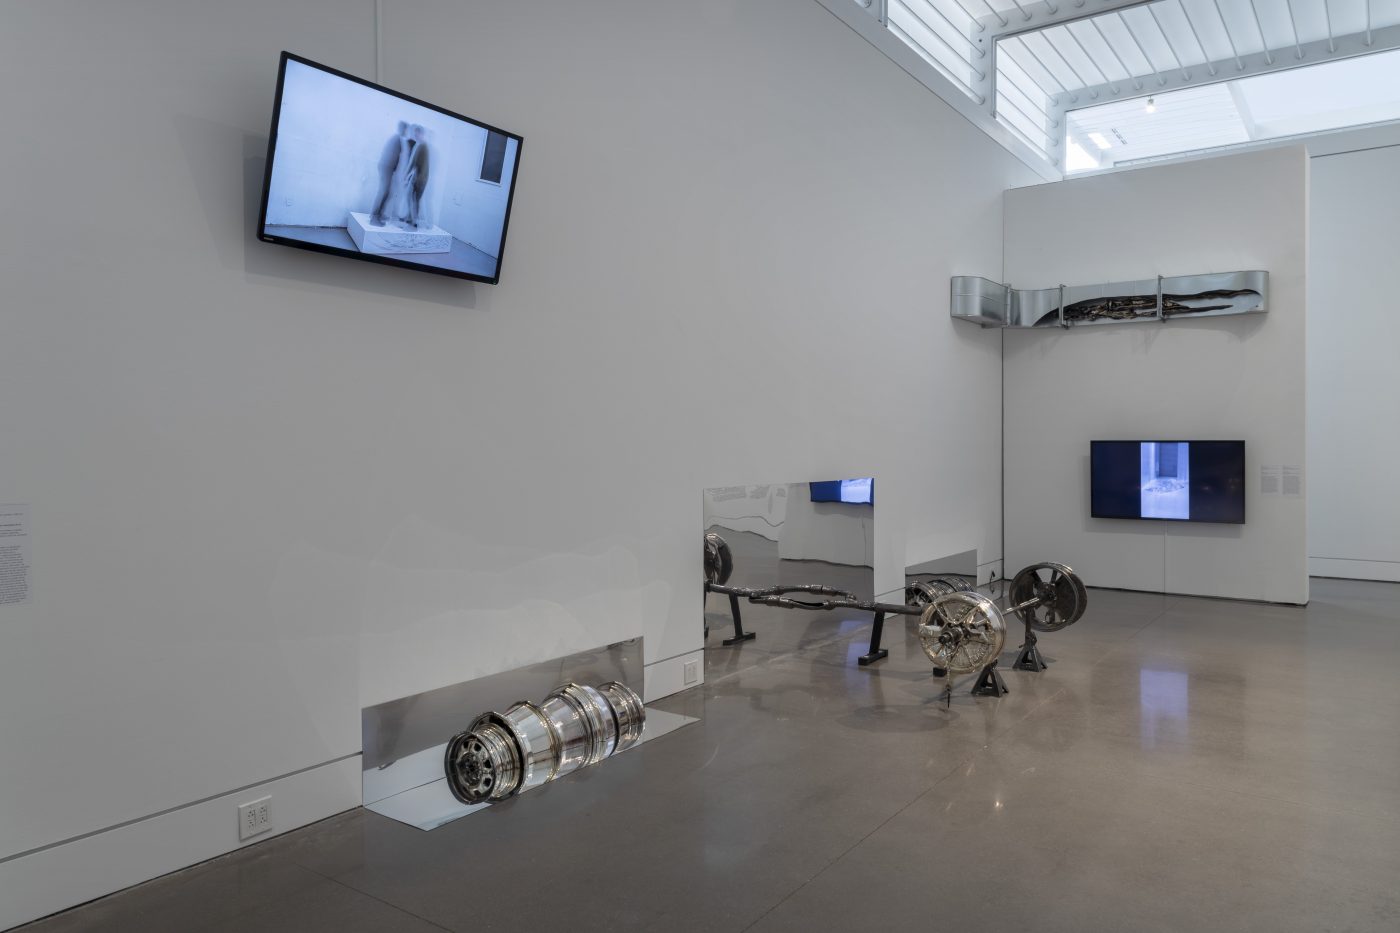 A corner installation view of Asif Main’s RAF: Prosthetic Location exhibition. On both walls hang flat screen monitors. In the corner is a thick chunk of metal, installed like a hinge. On the floor, leaned up against the longer wall are a trio of frameless mirrors. Placed in front of the mirrors are a row of rims and a propped up car axle.